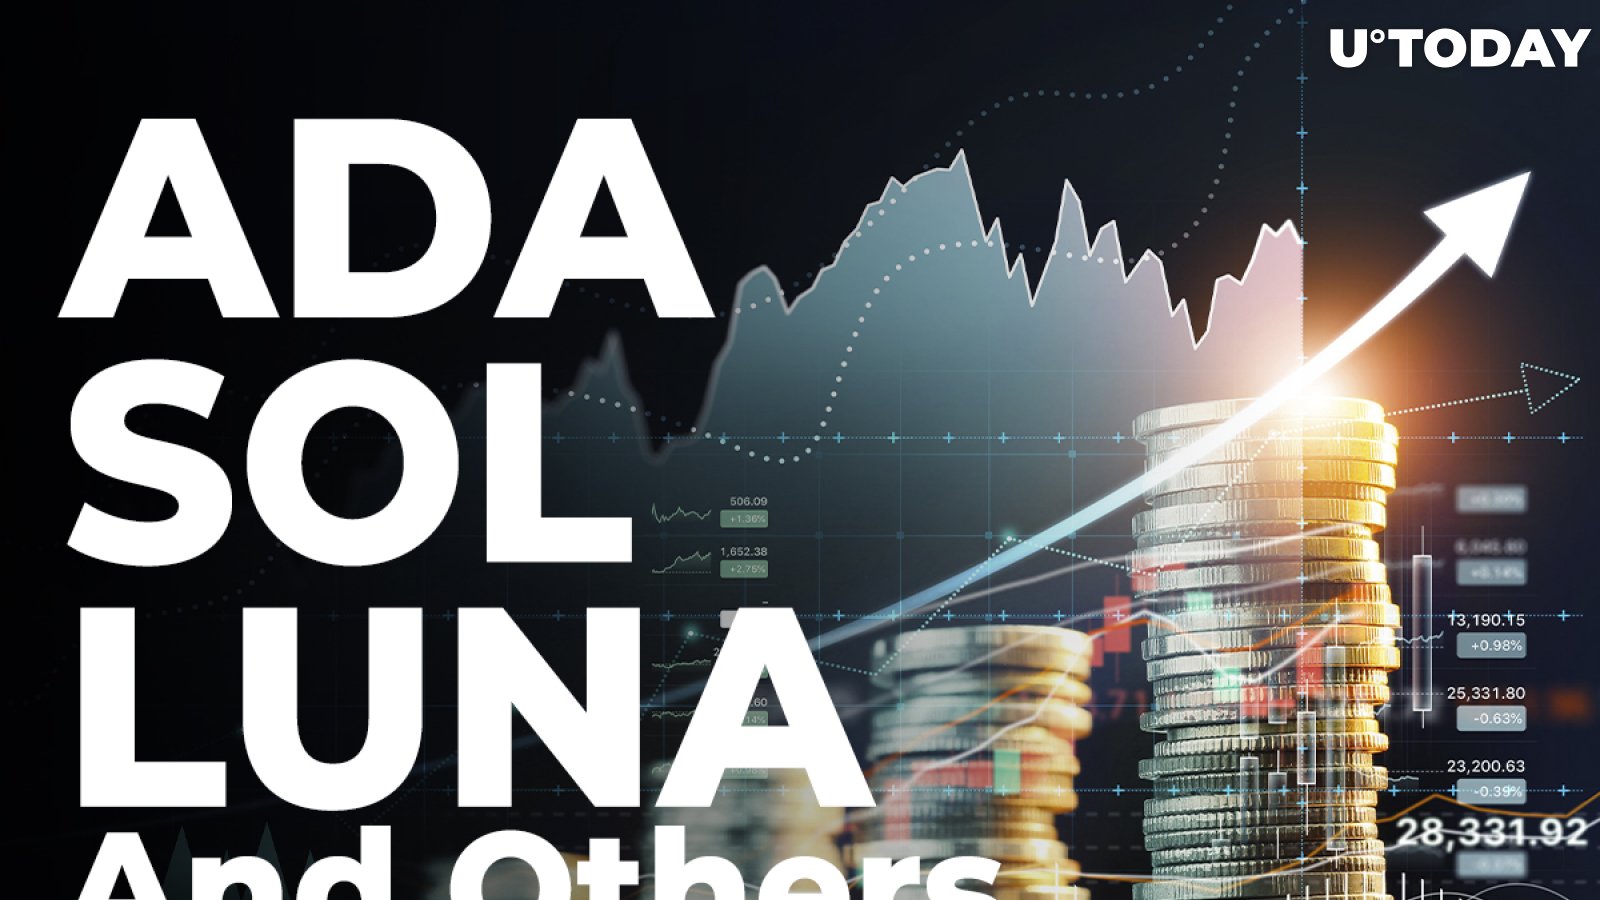 Altcoin Index Rises Thanks to ADA, SOL, LUNA and Other Assets, While Bitcoin Consolidates